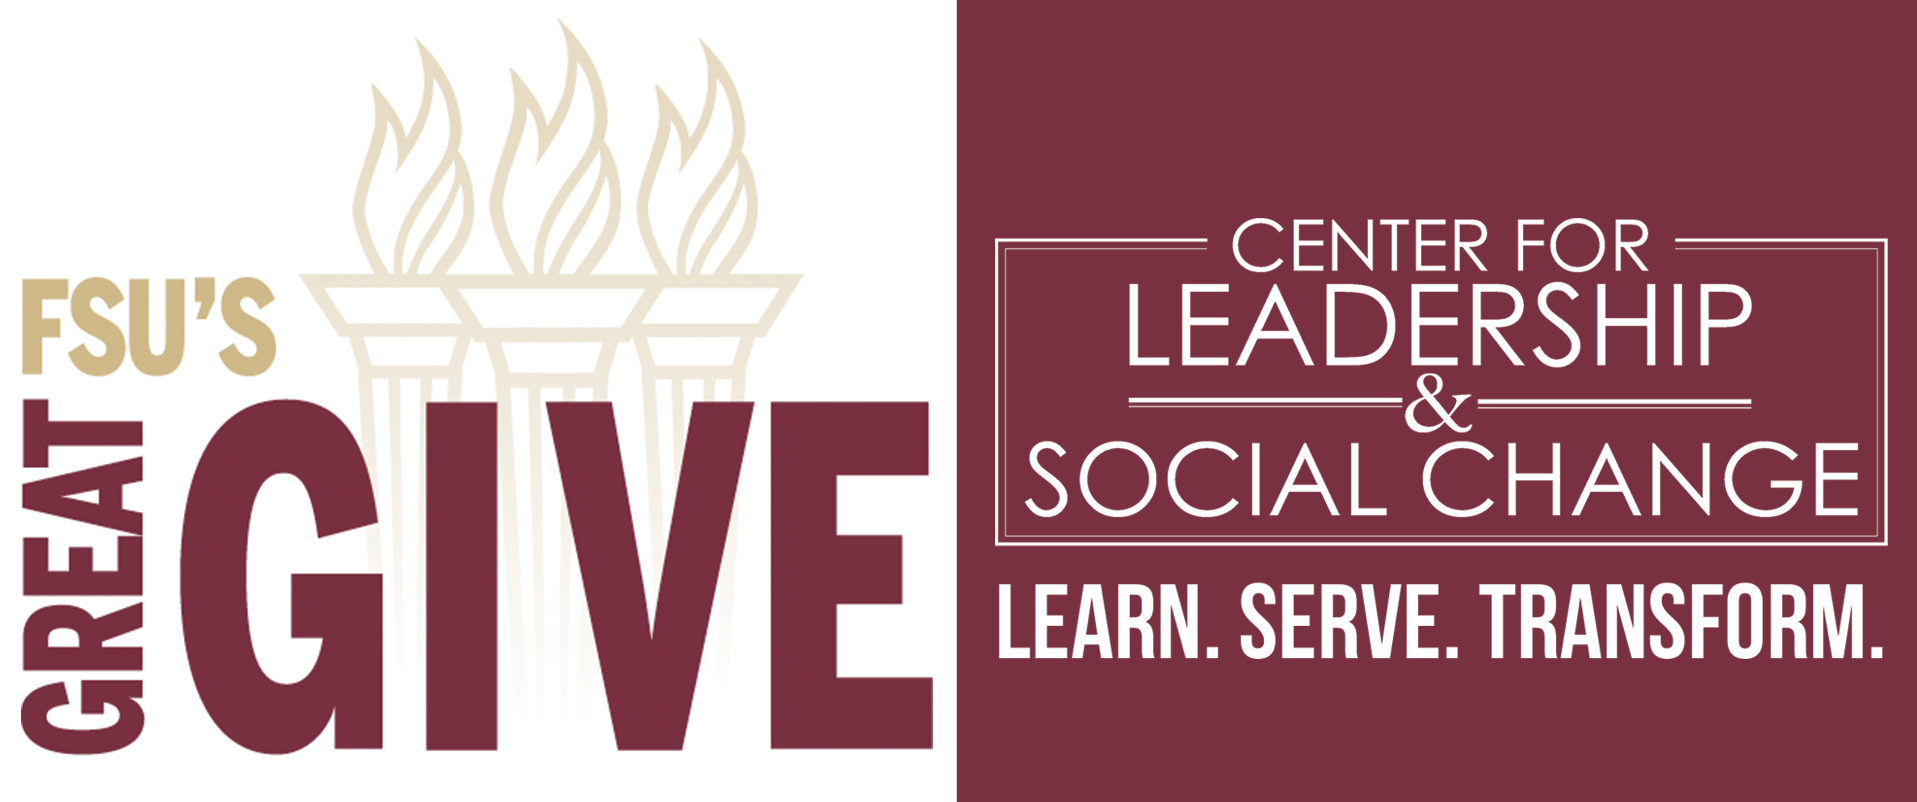 FSU's Great Give, Center for Leadership and Social Change